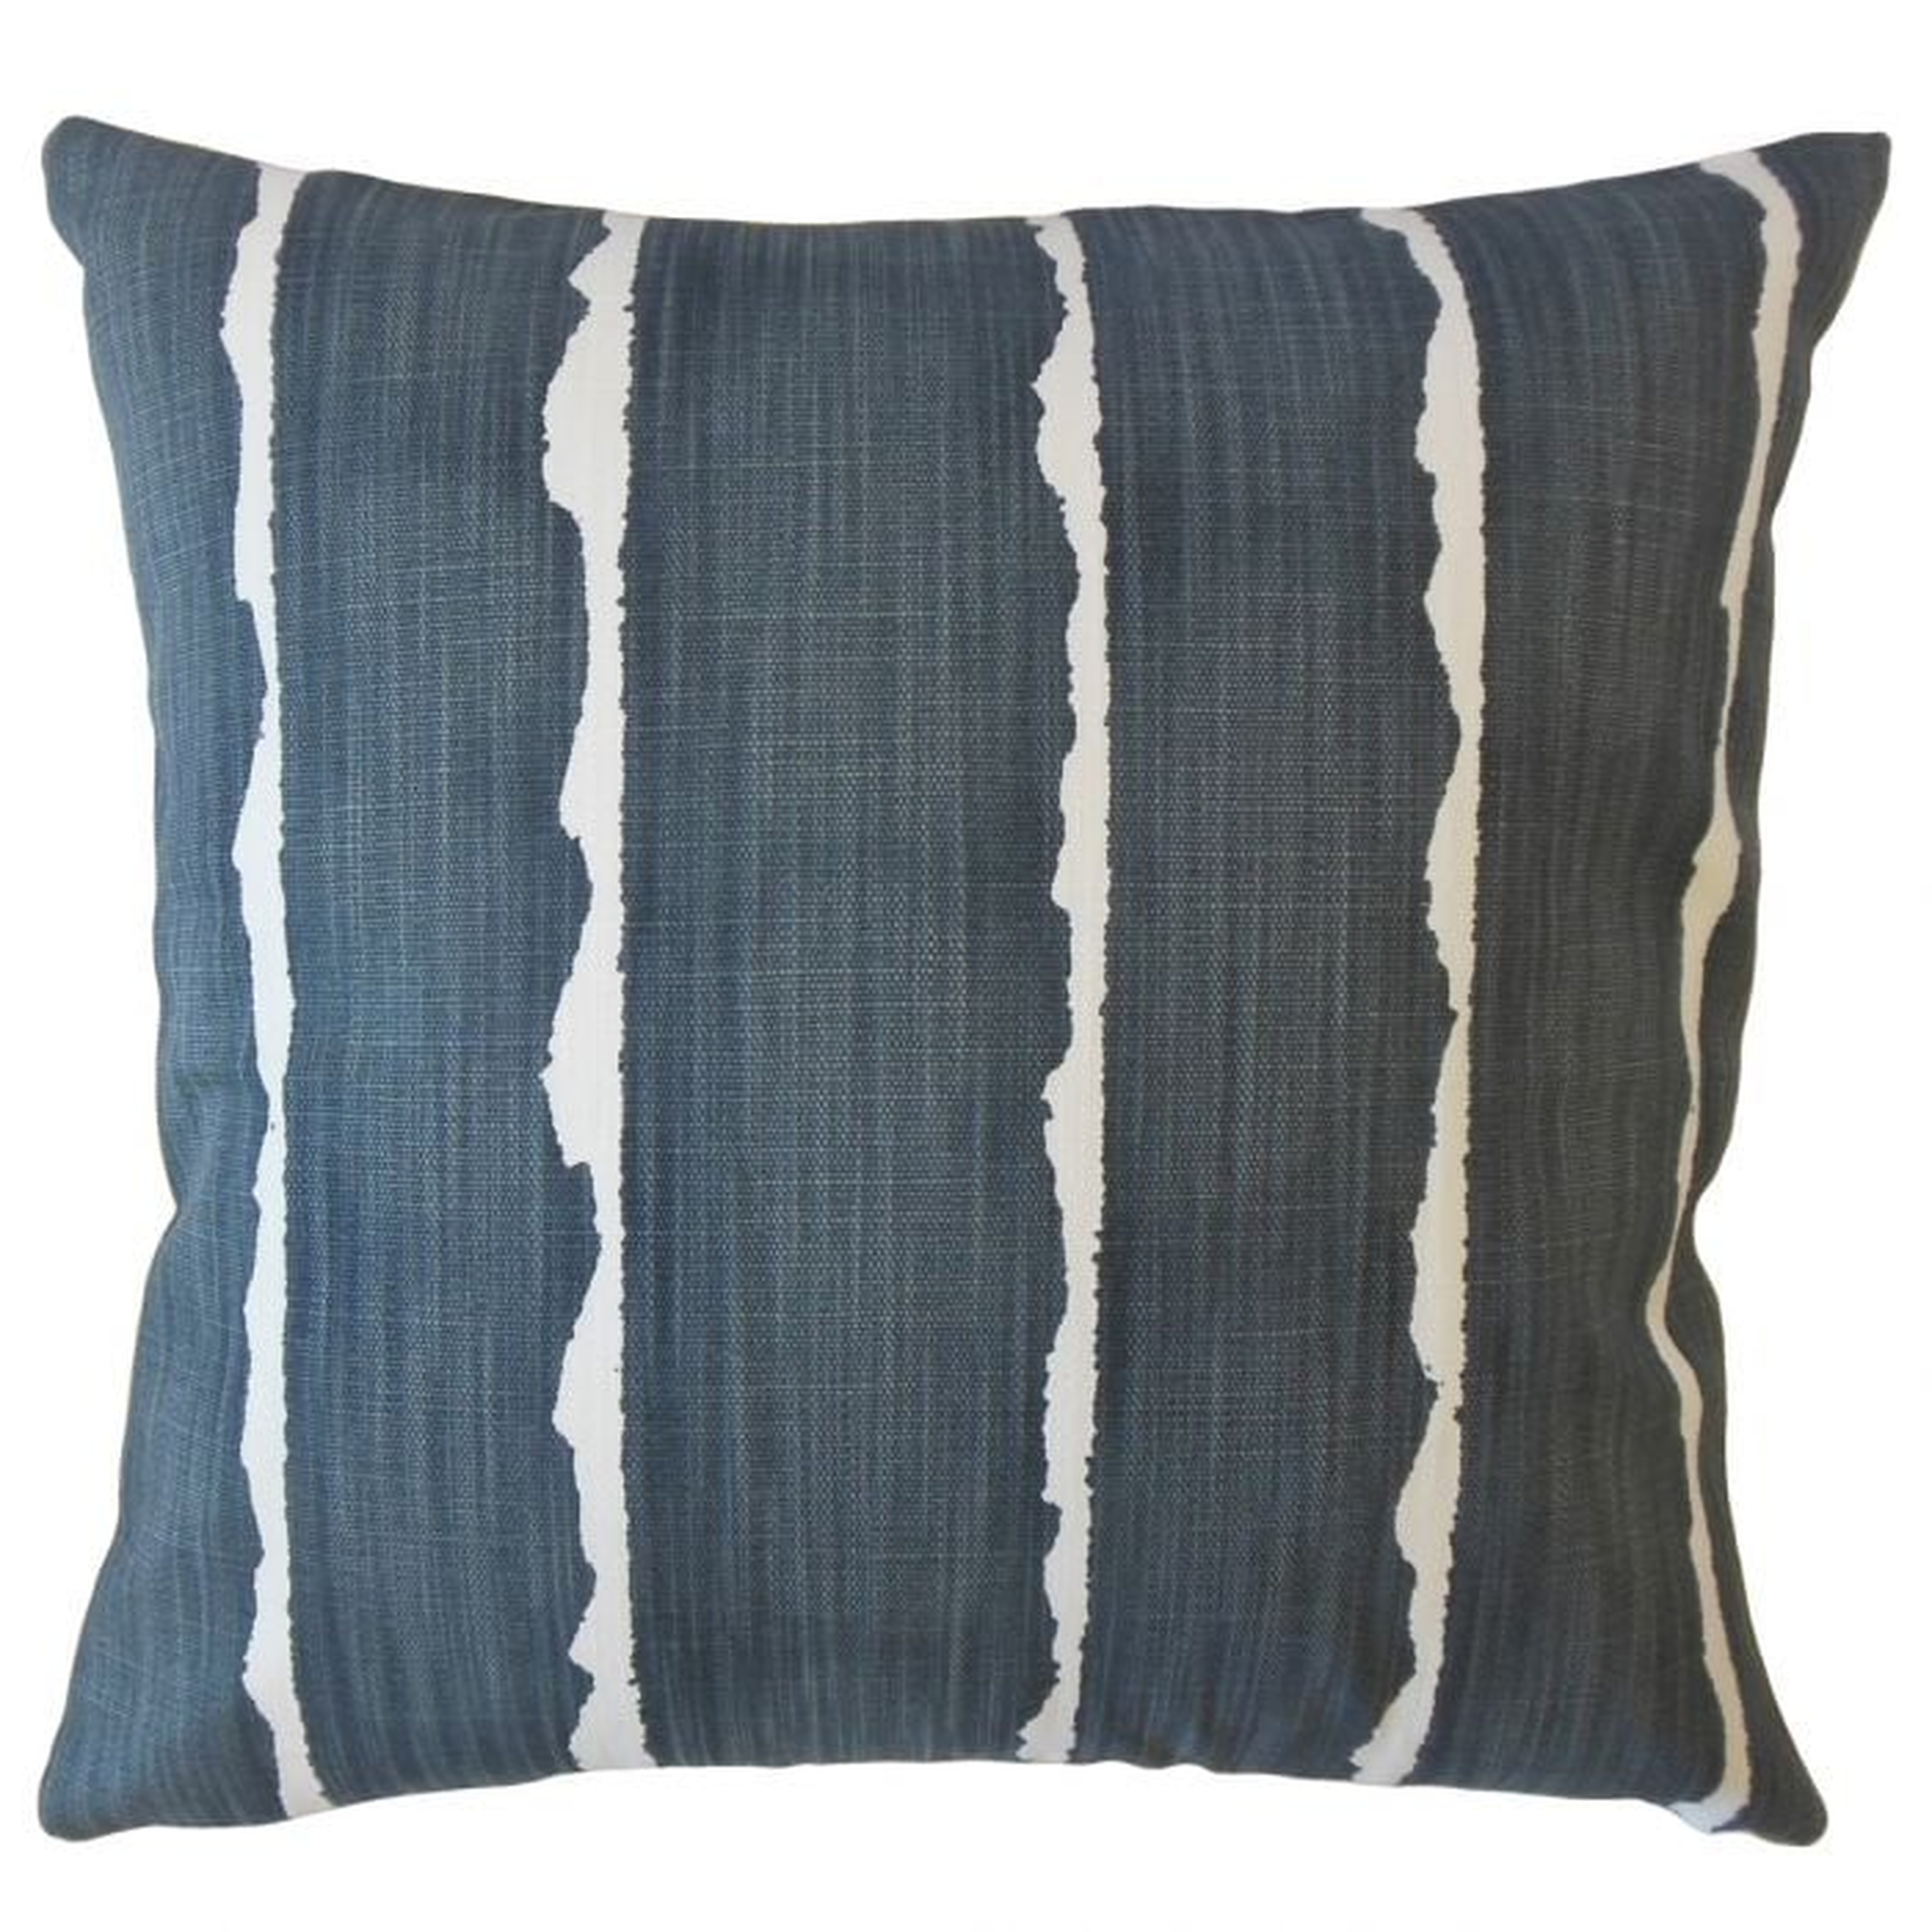 Panya Striped Pillow Carbon with Poly Insert - 18" x 18" - Linen & Seam